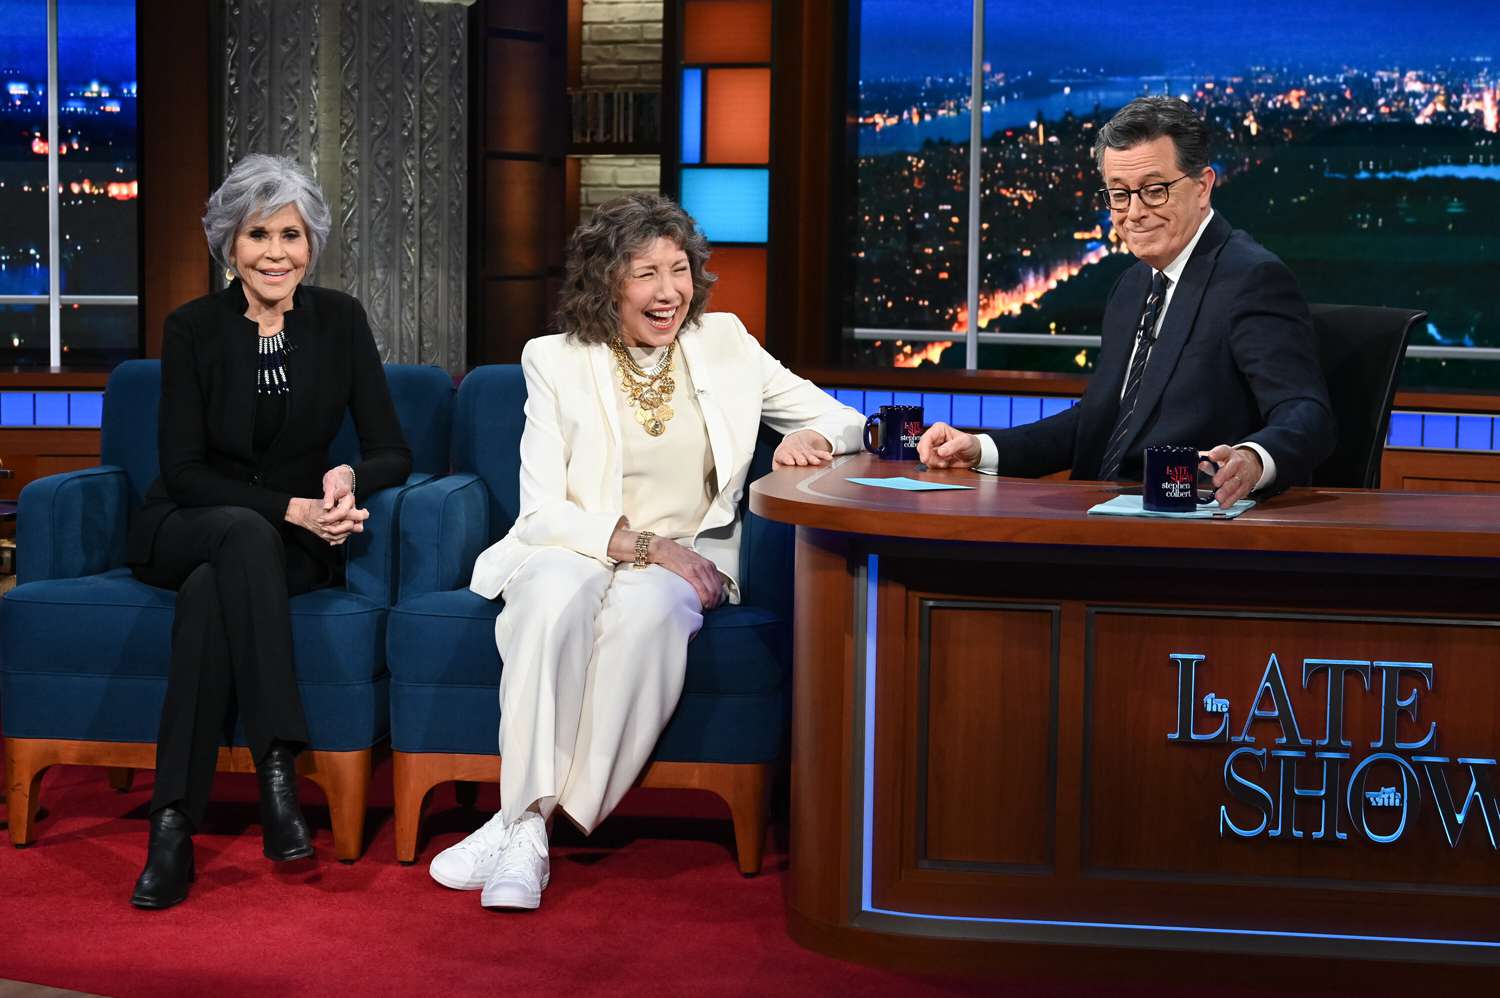 Lily Tomlin and Jane Fonda from The Late Show with Stephen Colbert